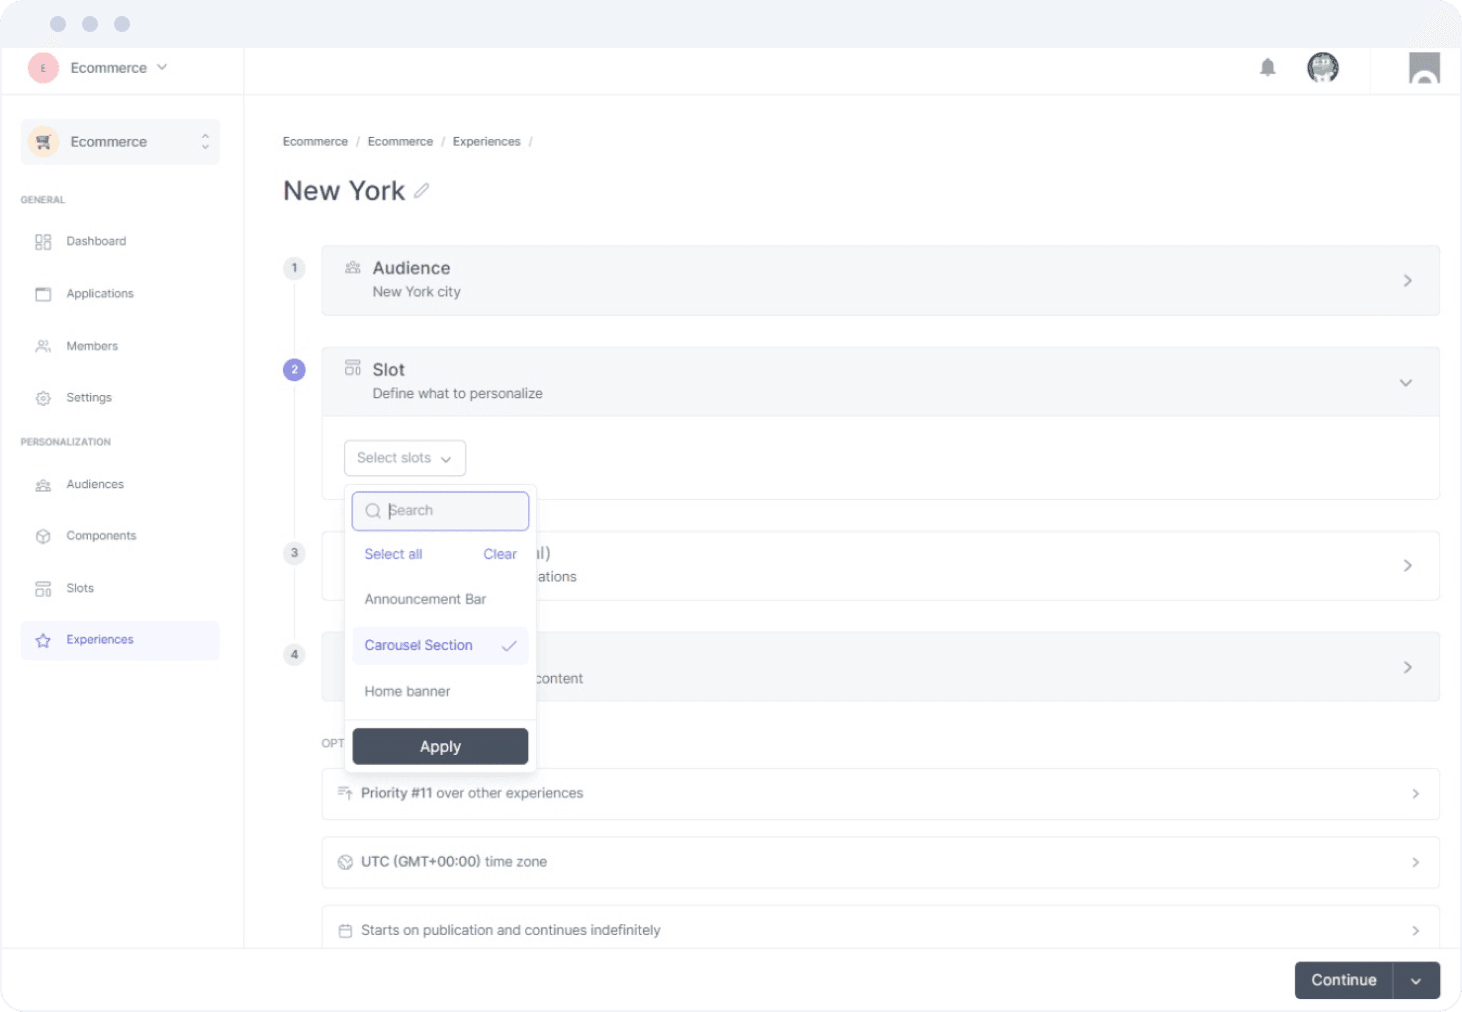 Screenshot of Croct's admin. A breadcrumb defines steps for creating an experience. A drop-down menu displays options of slots you can personalize.